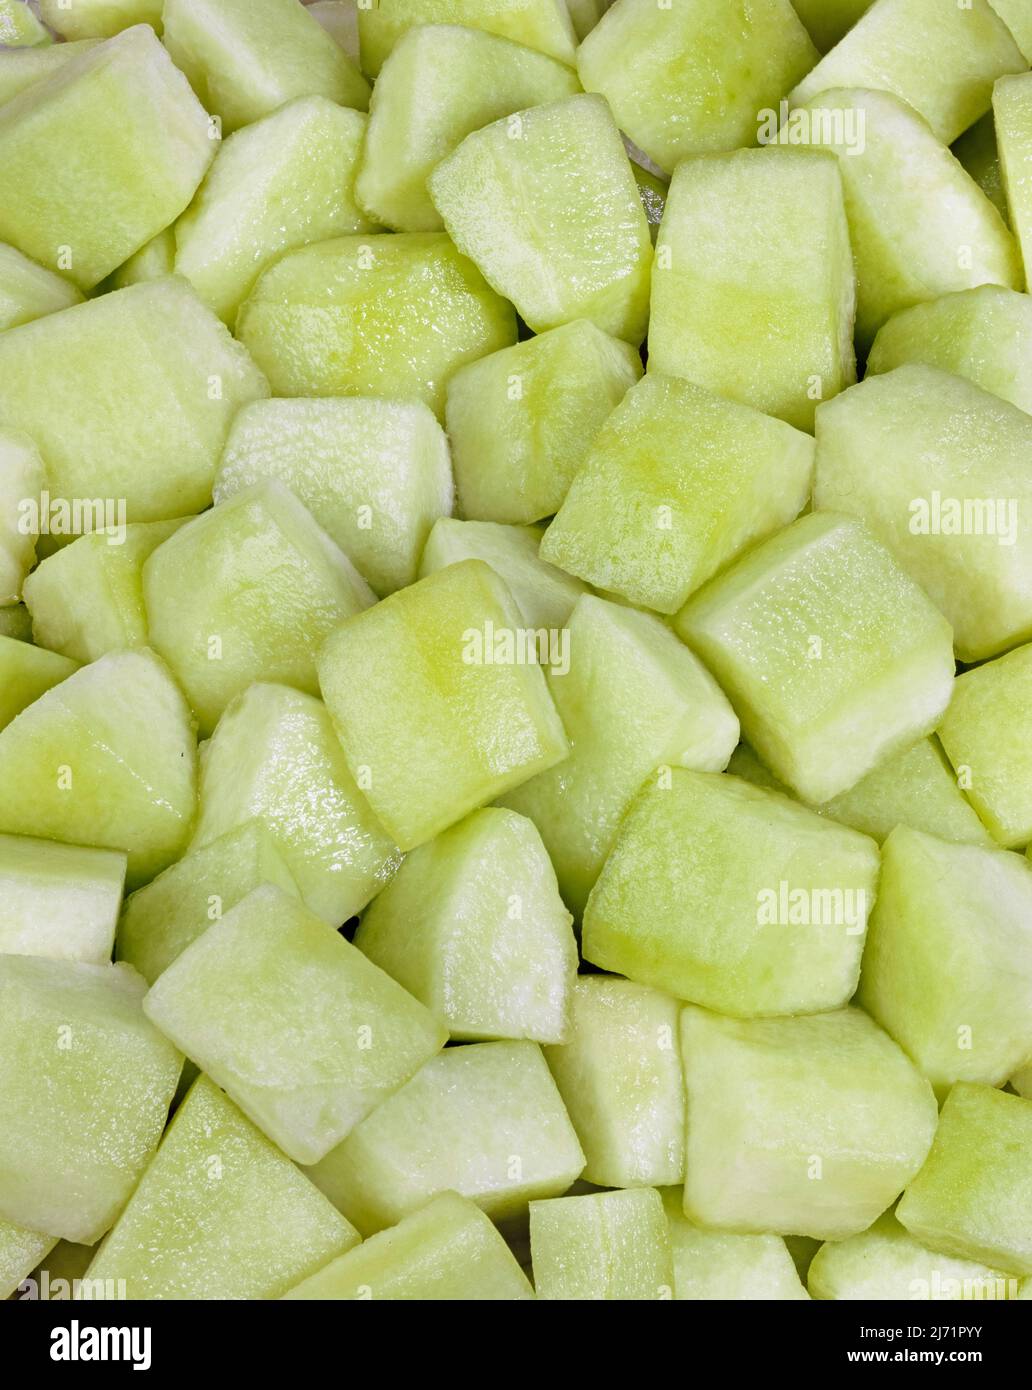 Honeydew Melon cut in juicy chunks. Image from 4x5 inch film transparency. Stock Photo